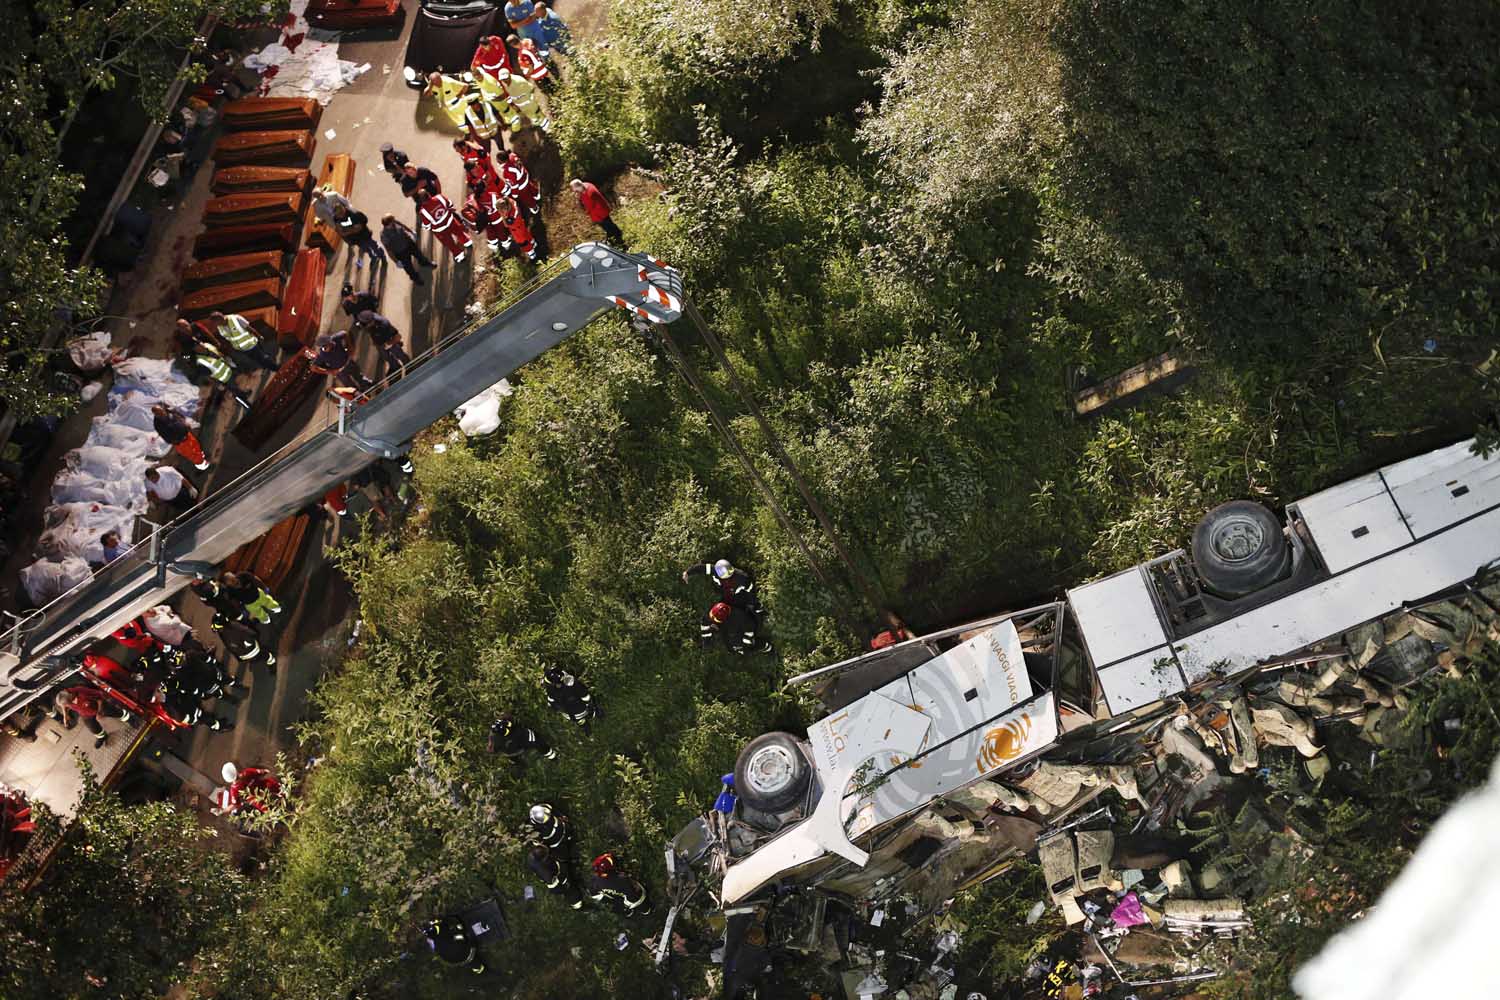 July 28, 2013. Rescuers prepare the coffins of victims of a bus crash on the road between Monteforte Irpino and Baiano, southern Italy.